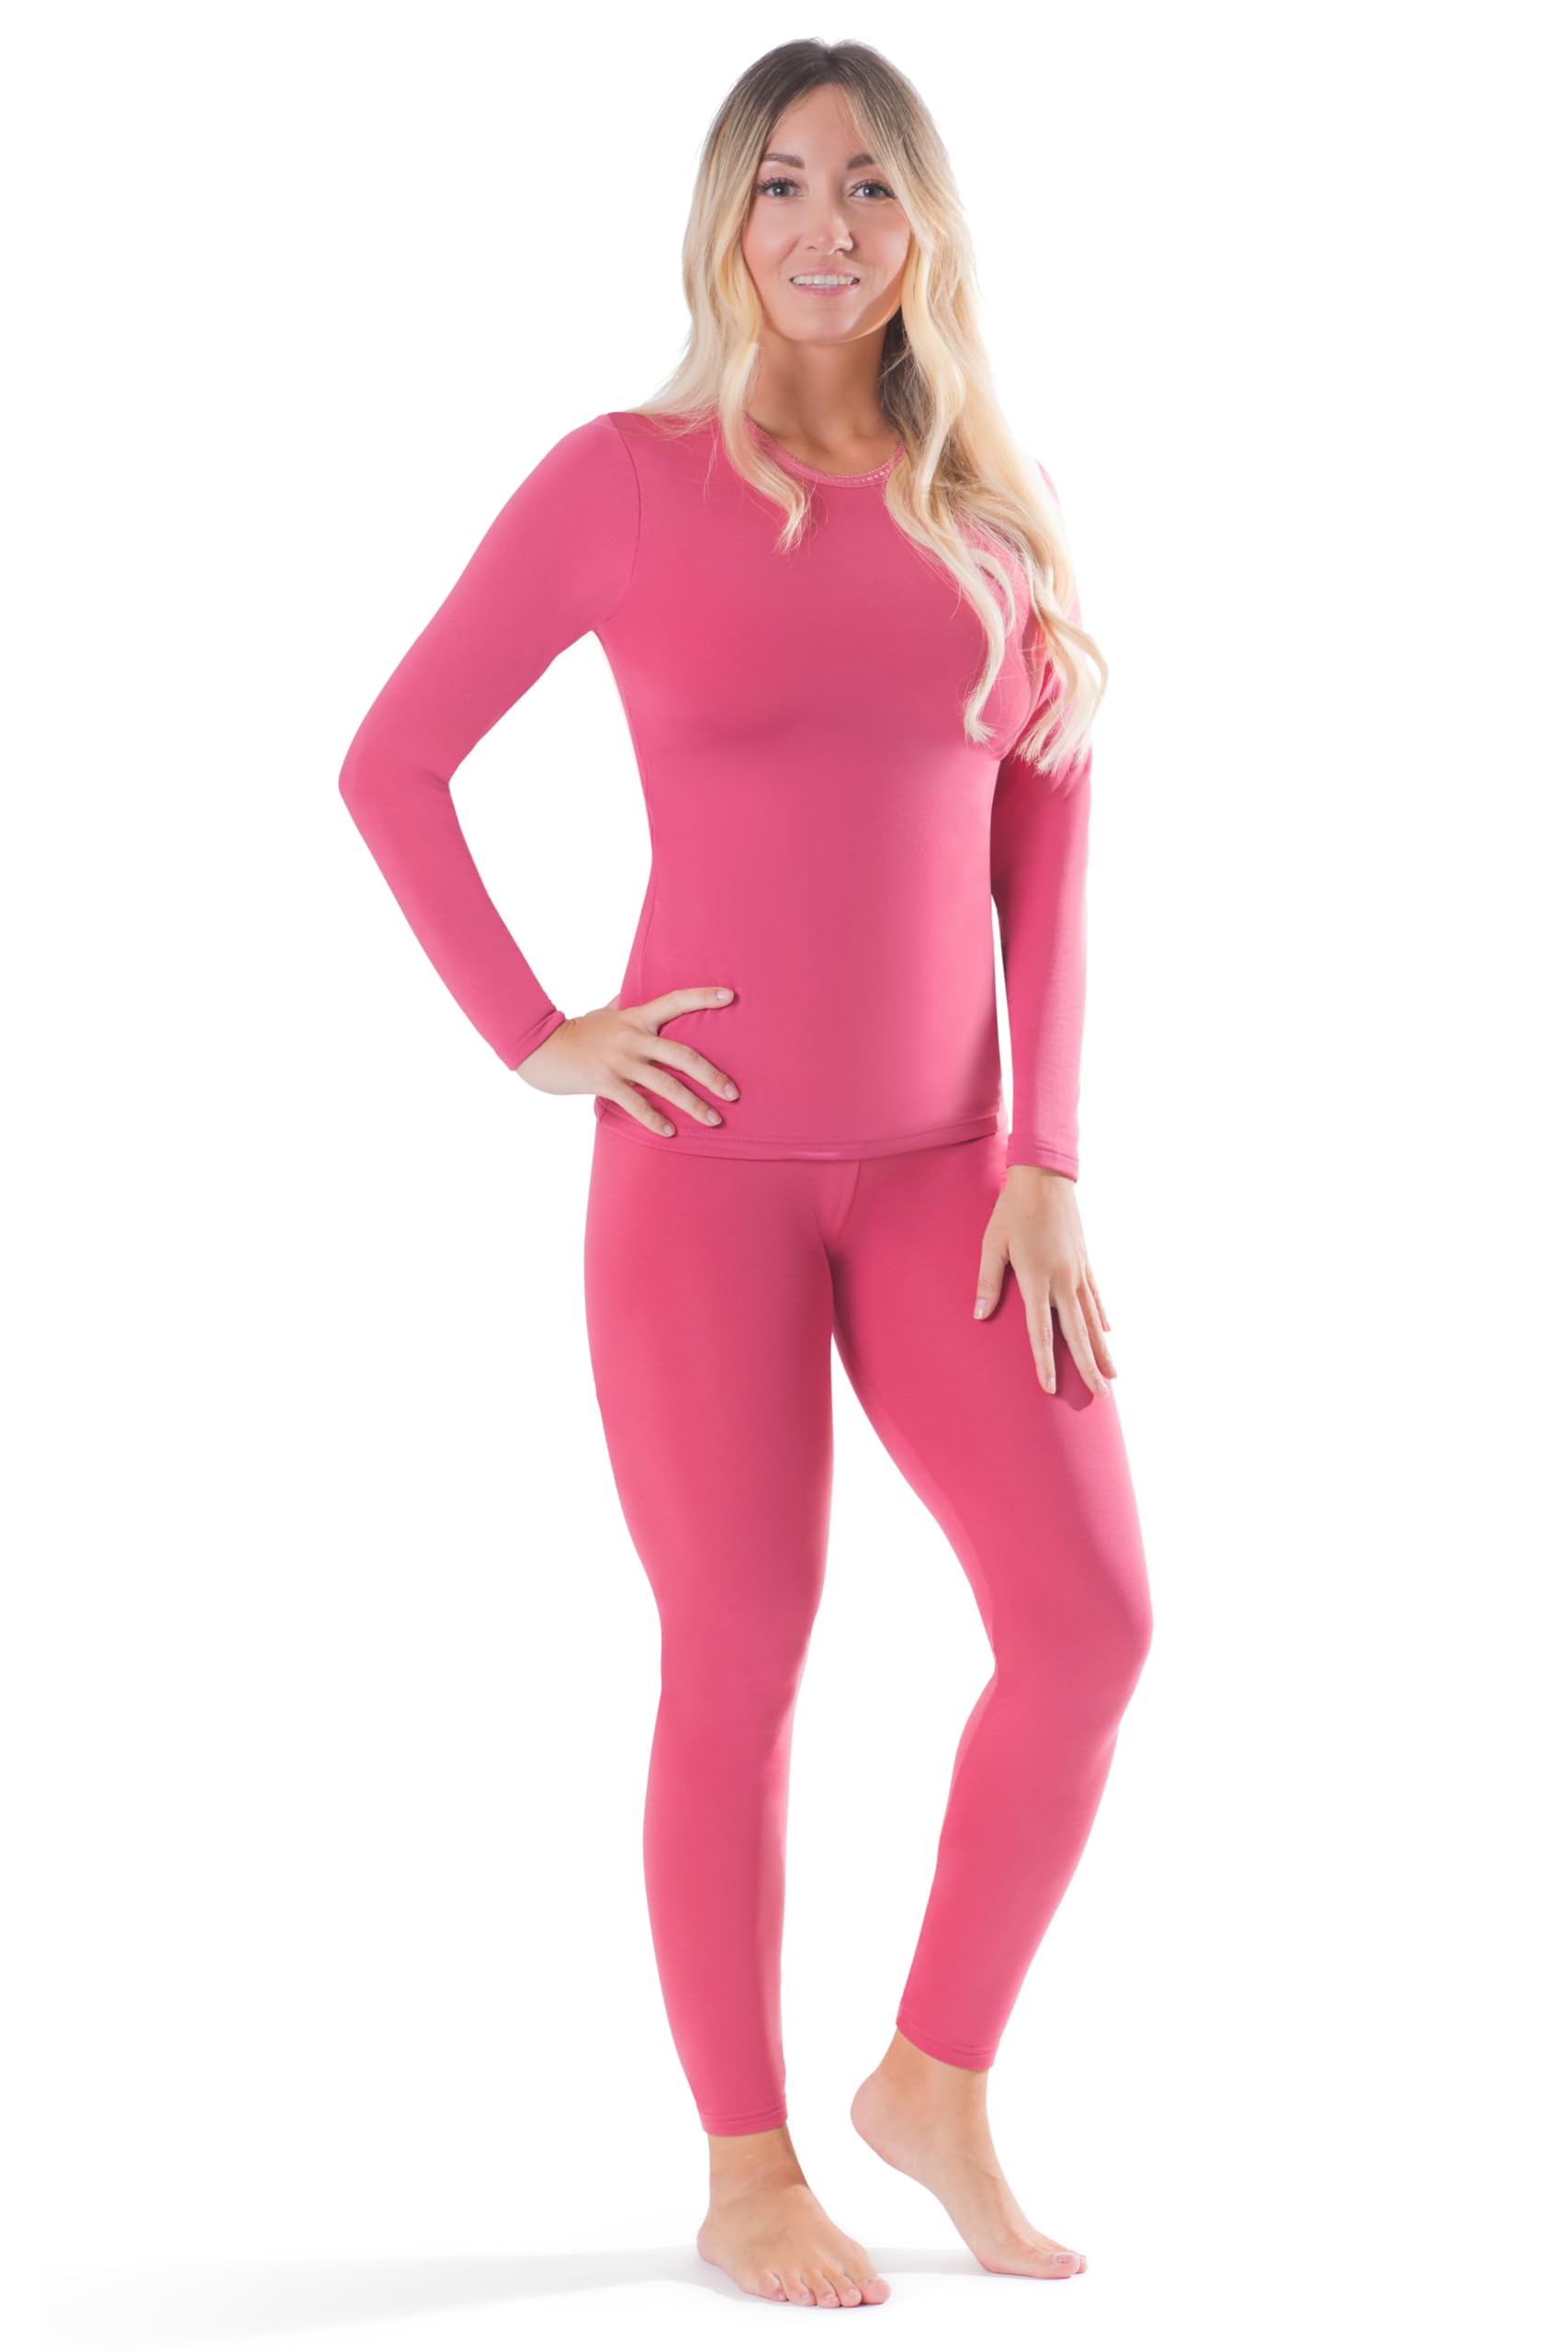 Thermal Underwear for Women (Long Johns Thermals Set) Shirt